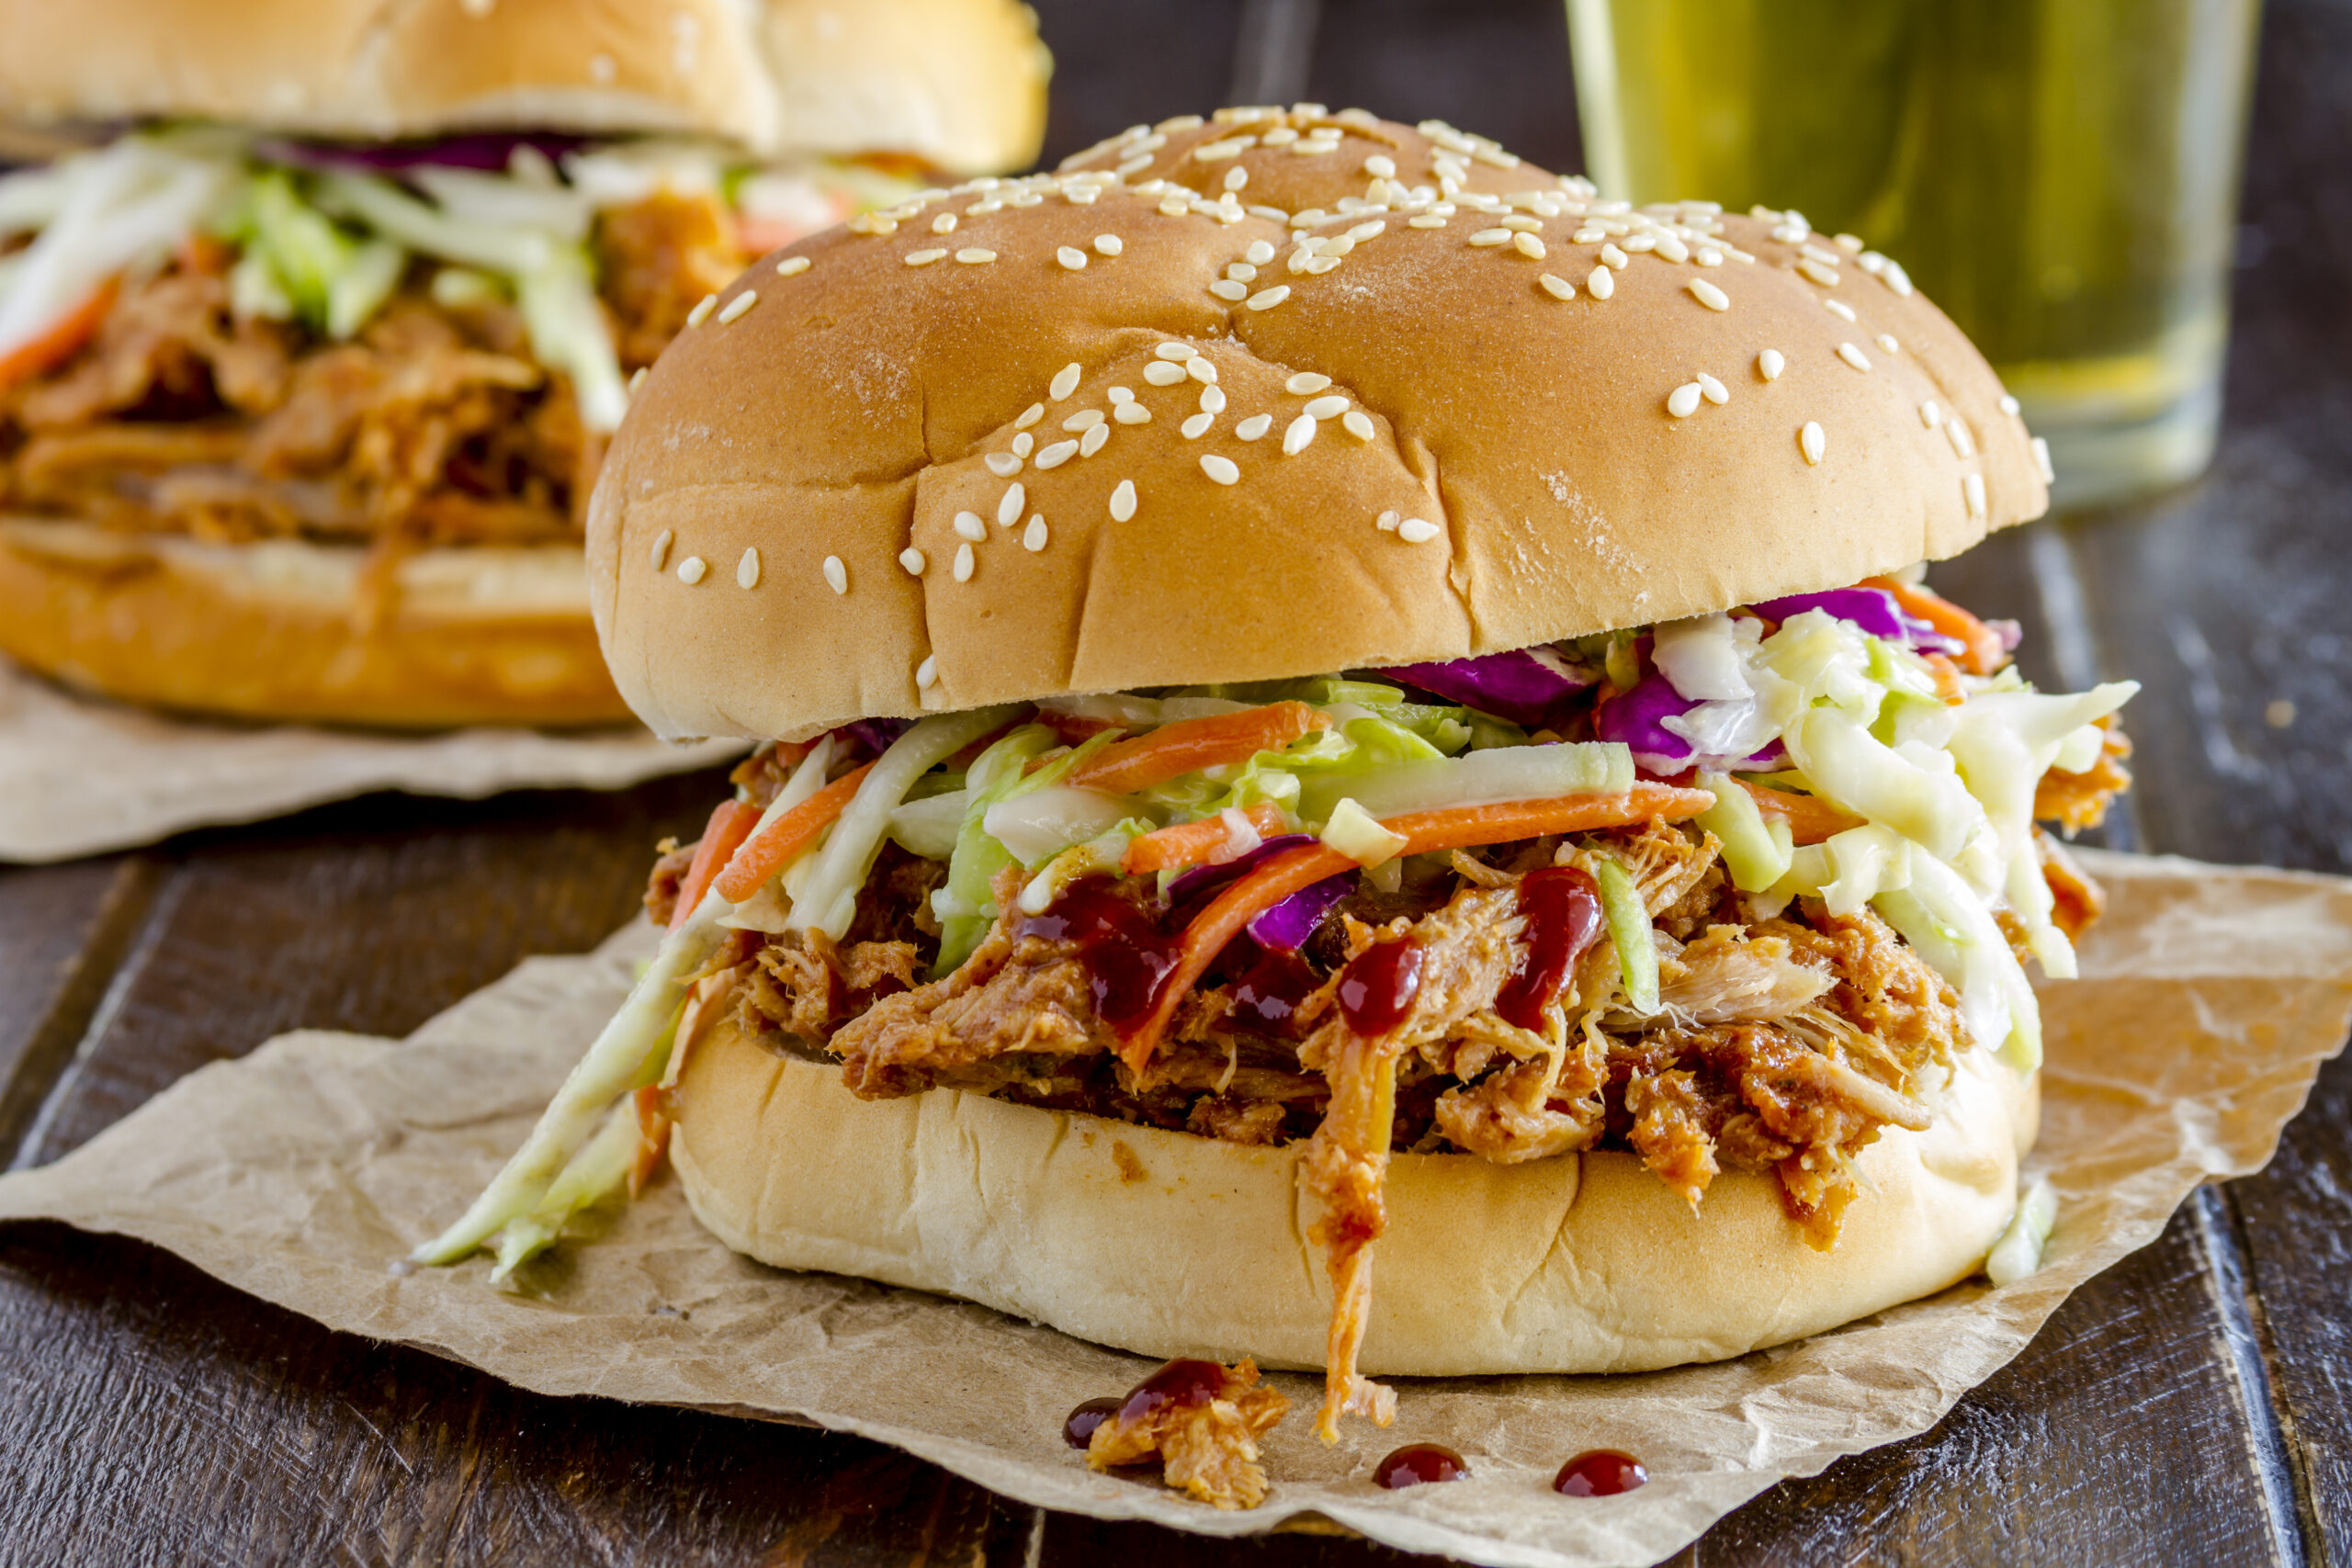 Spicy Pulled Pork Sandwiches Recipe; Homemade BBQ sauce with this pork shoulder for fall off the bone perfection! Great for lunch or dinner.